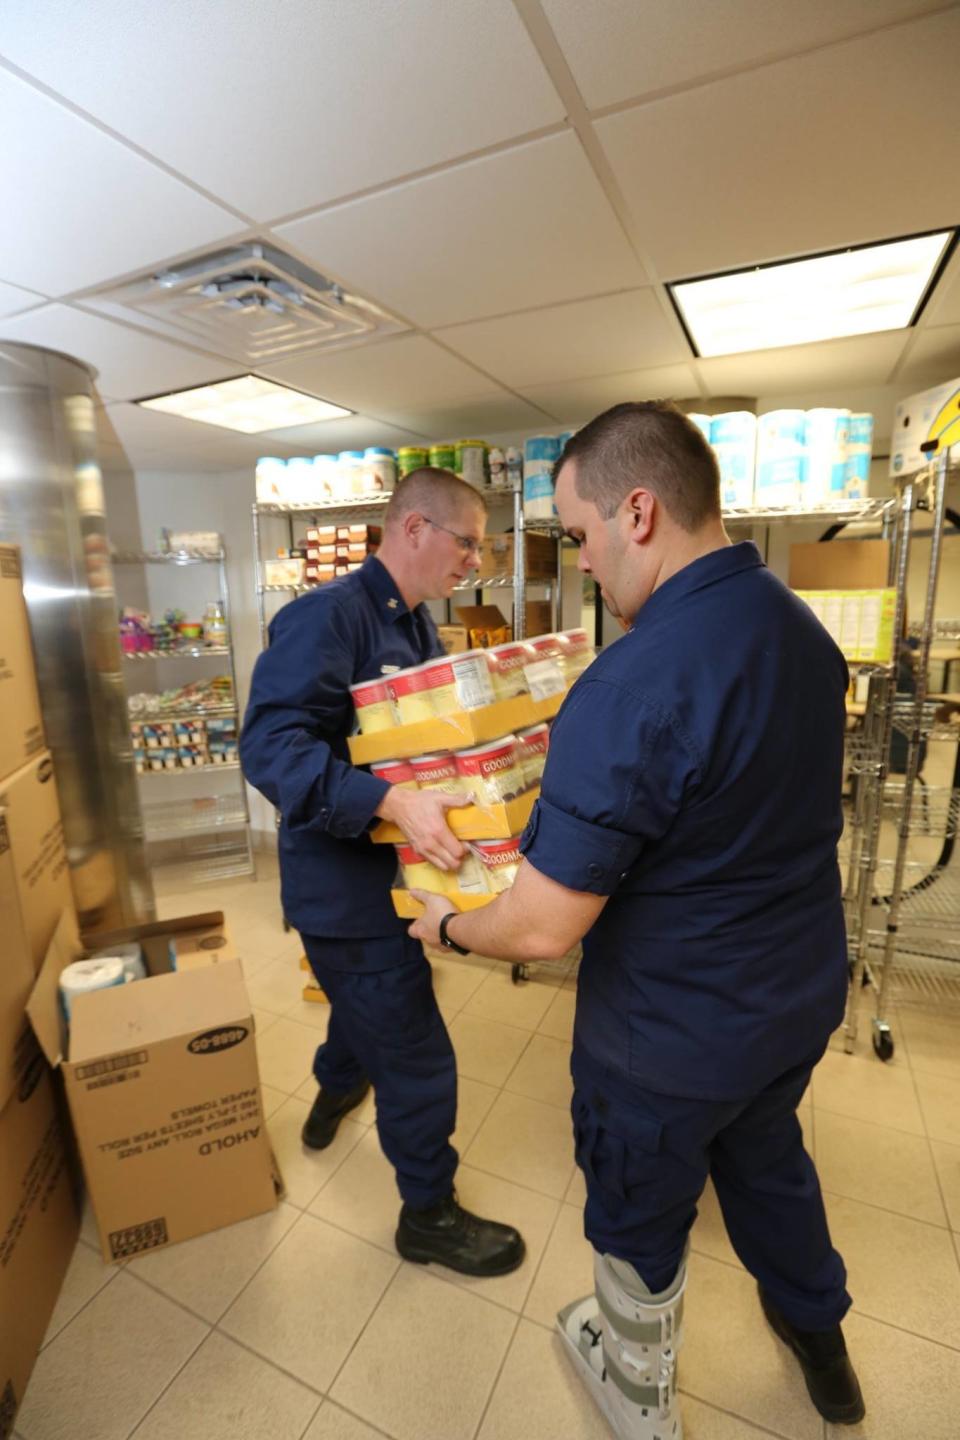 The Massachusetts Military Support Foundation is working to bring food and other basic needs to military members affected by the government shutdown. In a matter of two weeks, two of its temporary pantries went through three months' worth of diapers. (Photo: Massachusetts Military Support Foundation/Facebook)